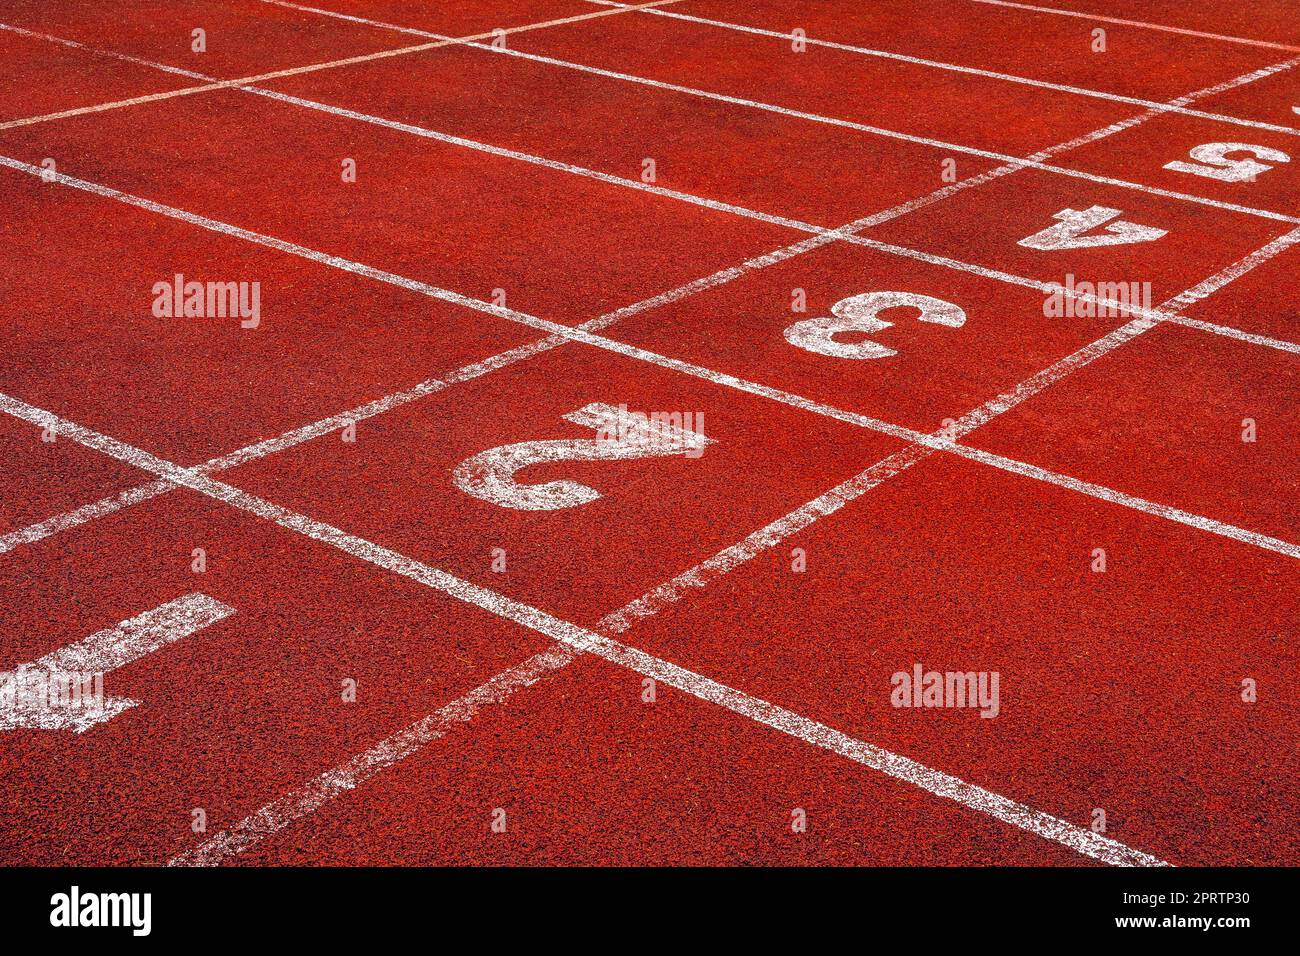 Start points with numbers on running track or athlete track in stadium Stock Photo